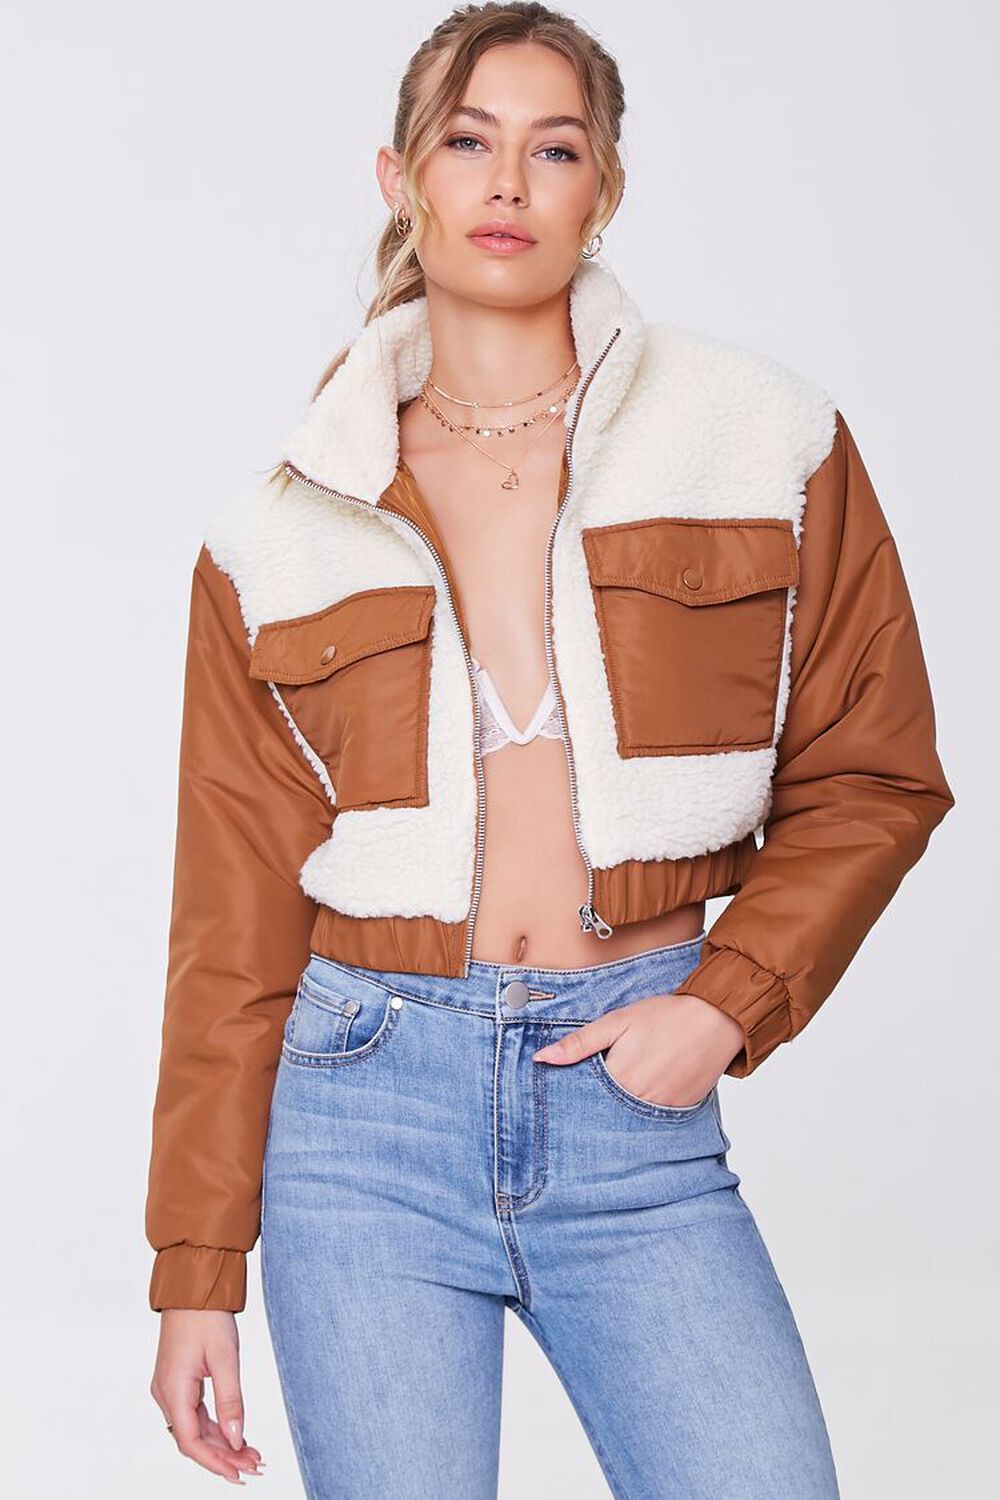 CREAM/LIGHT BROWN Colorblock Faux Shearling Jacket, image 1